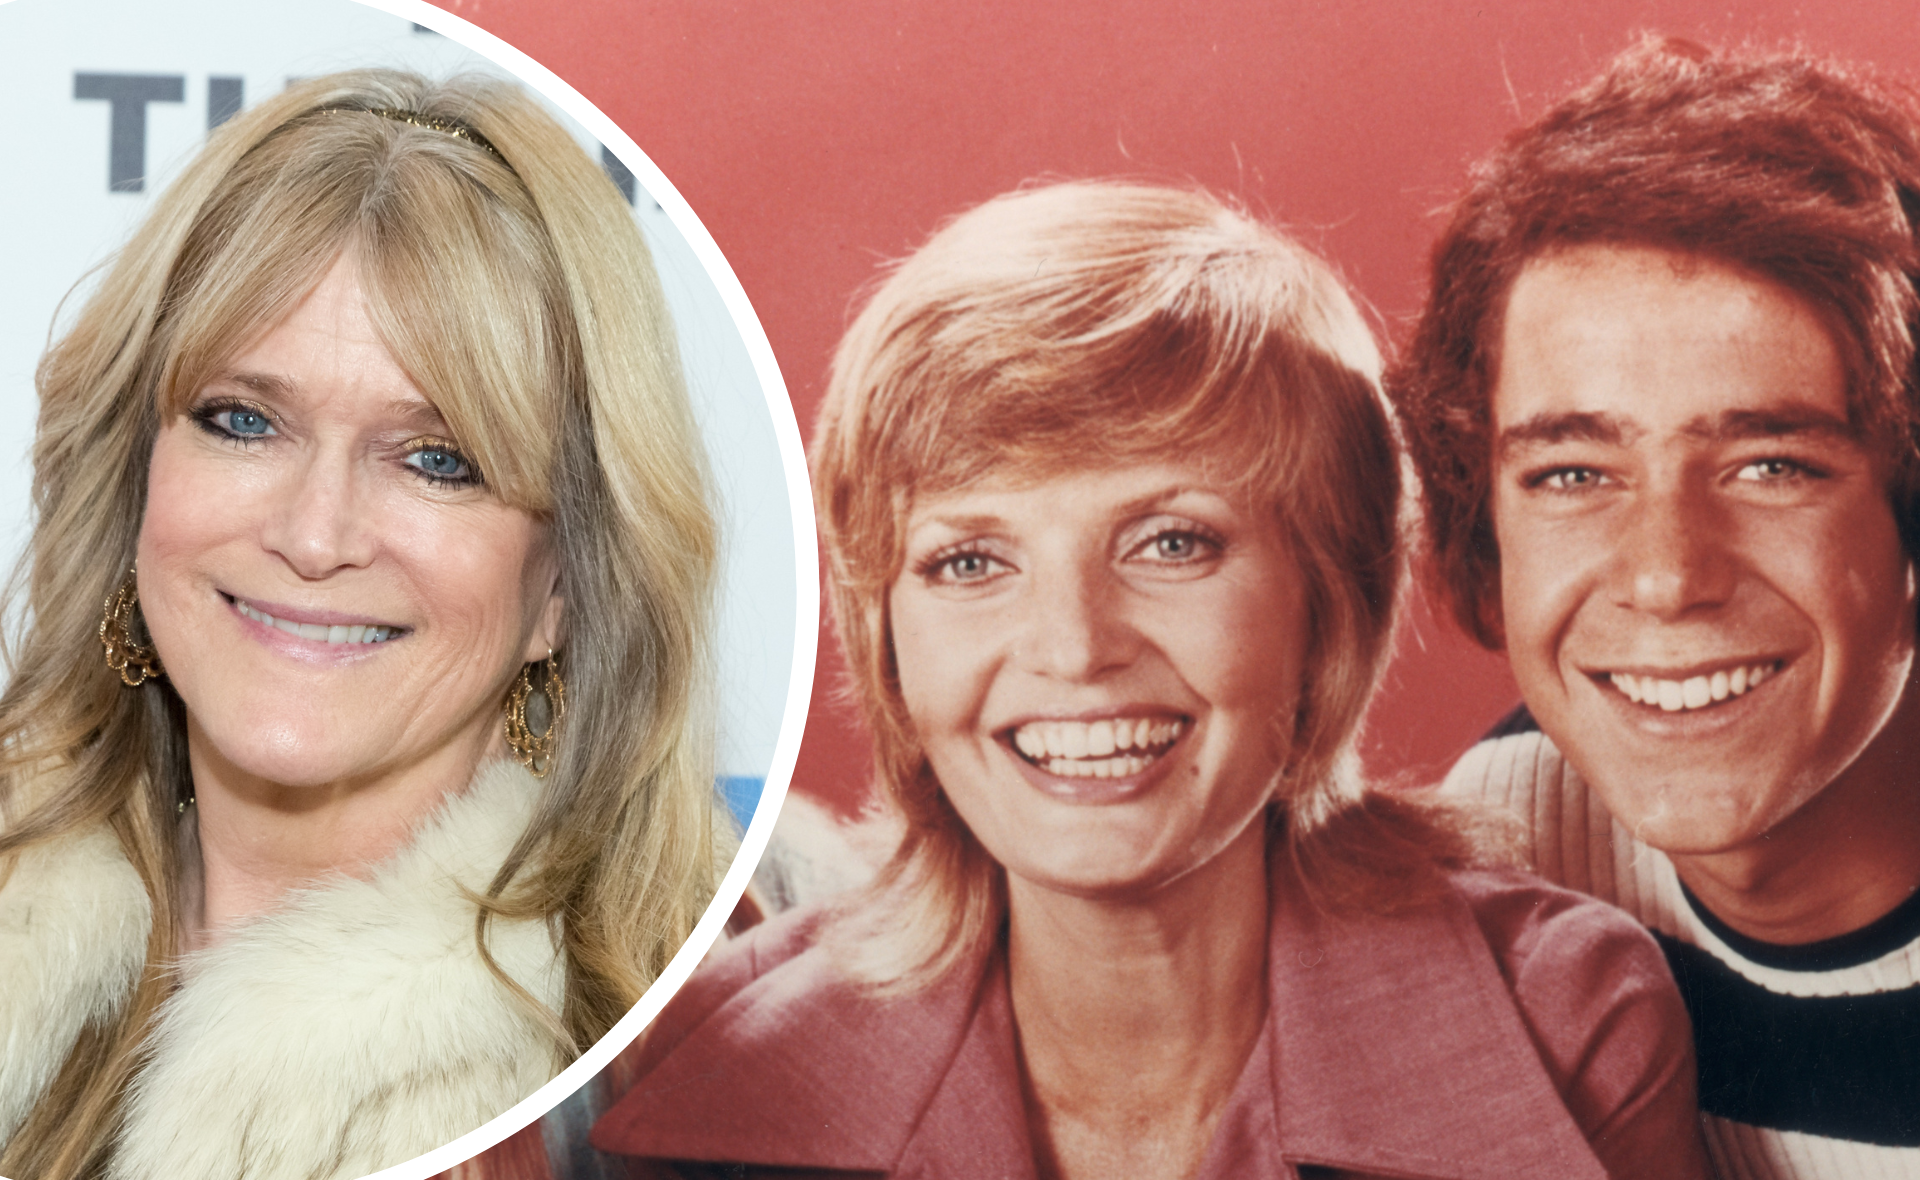 The Brady Bunch star reveals the truth behind on-set affair